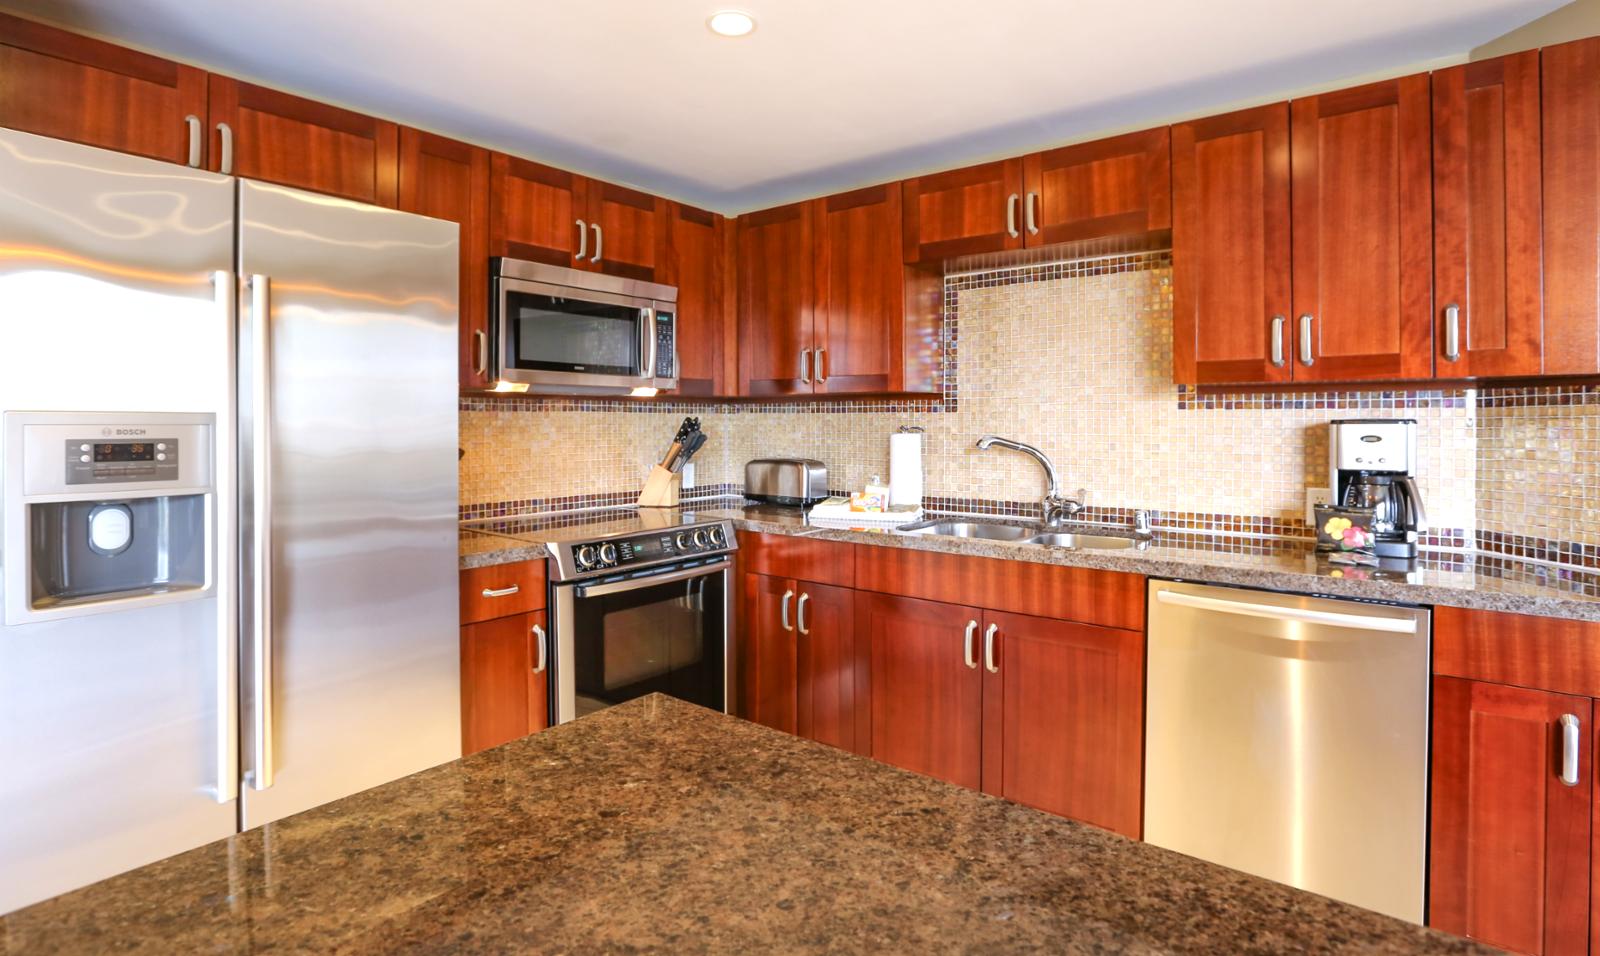 Clean stainless appliances throughout, kitchen is fully stocked with utensils. 